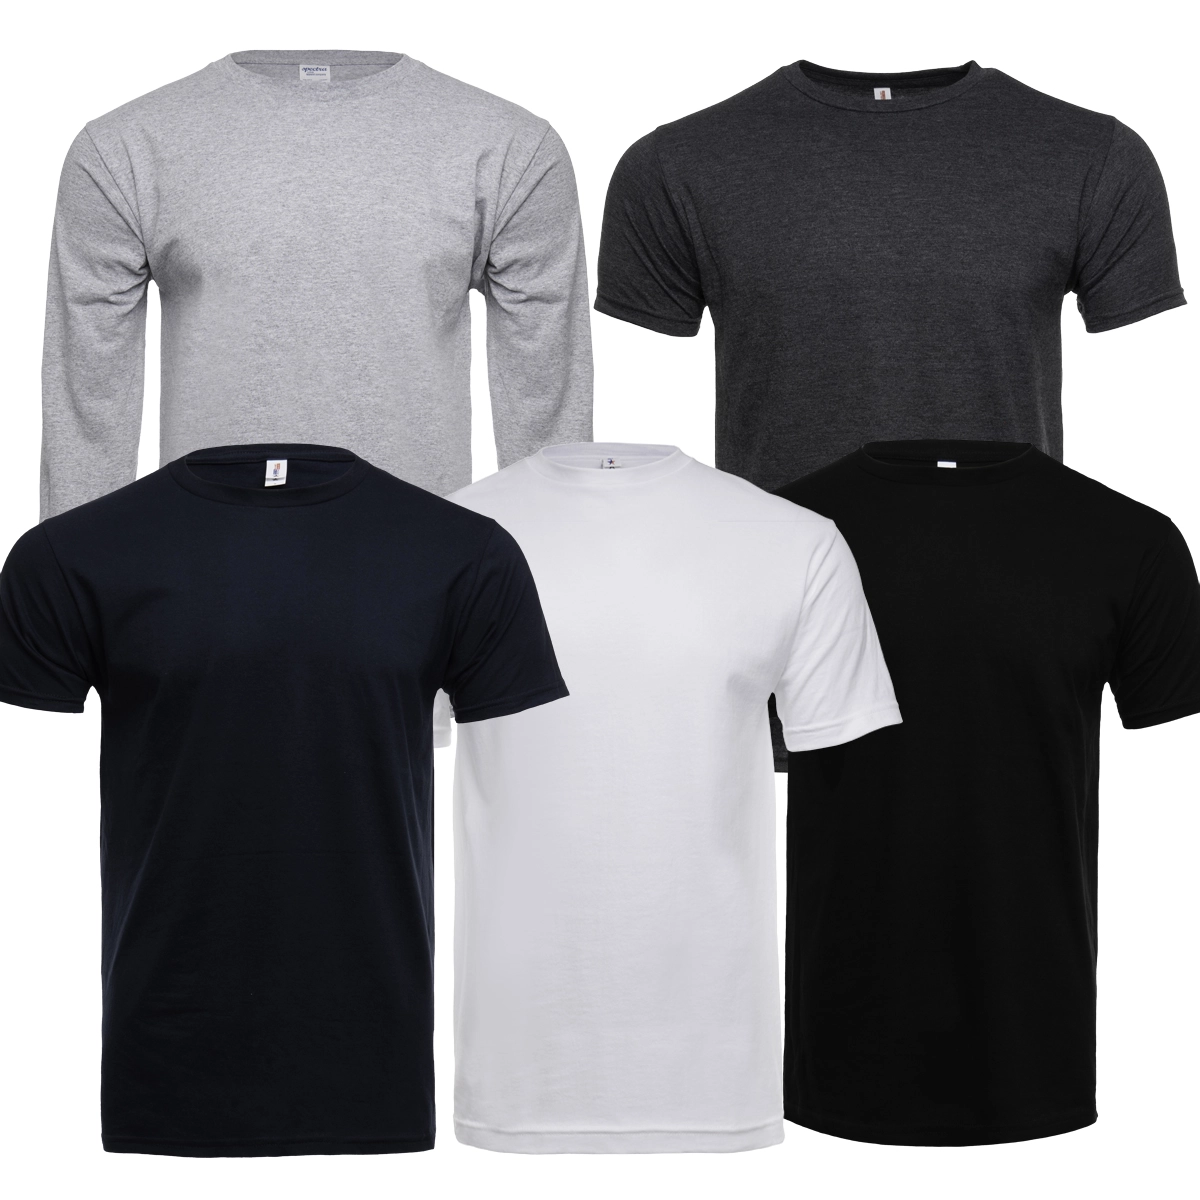 a sample pack of Spectra t-shirts